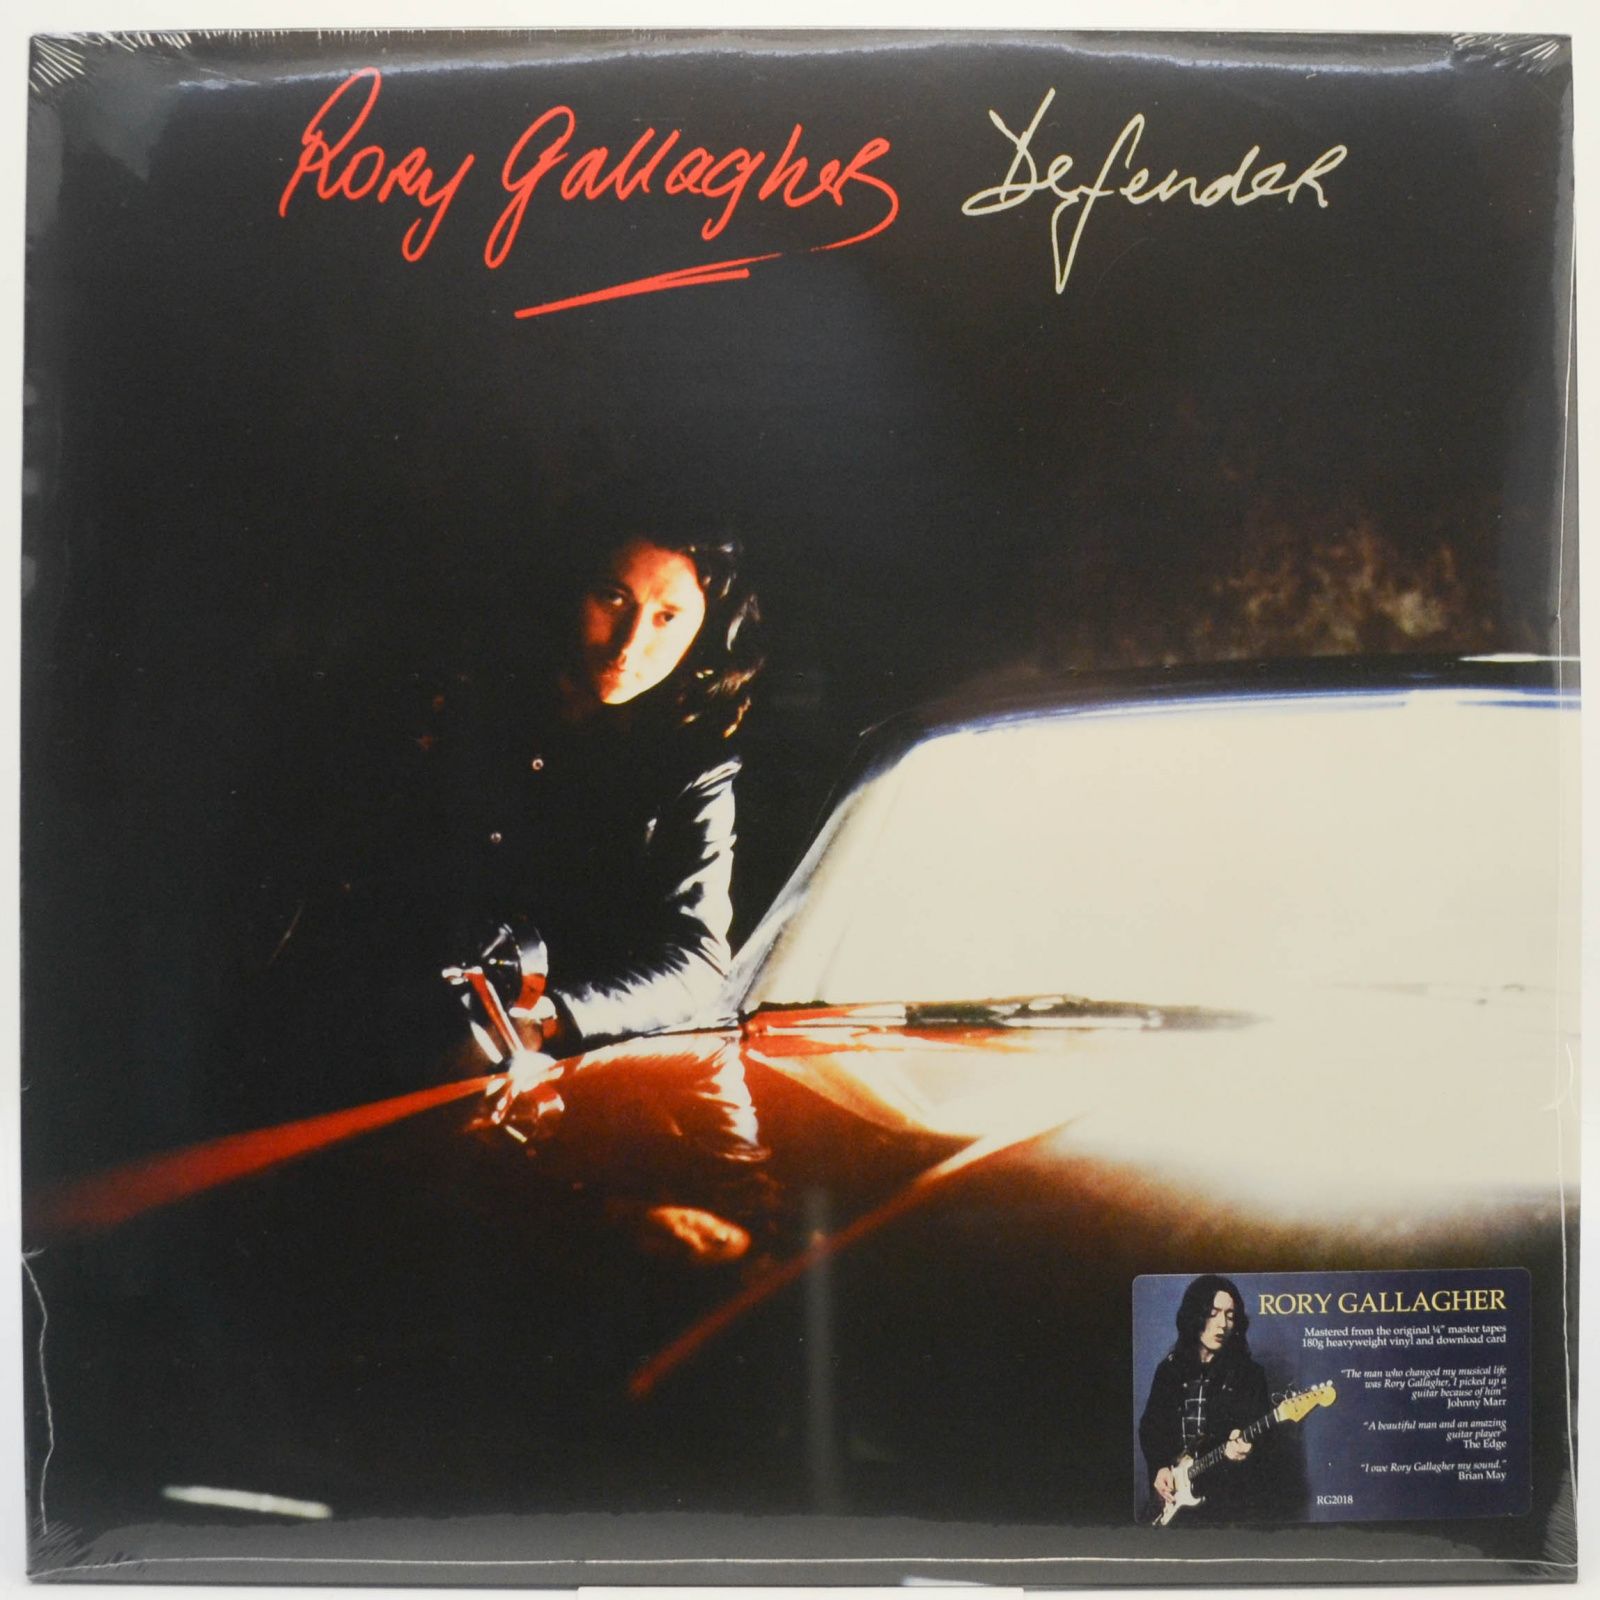 Rory Gallagher — Defender, 1987